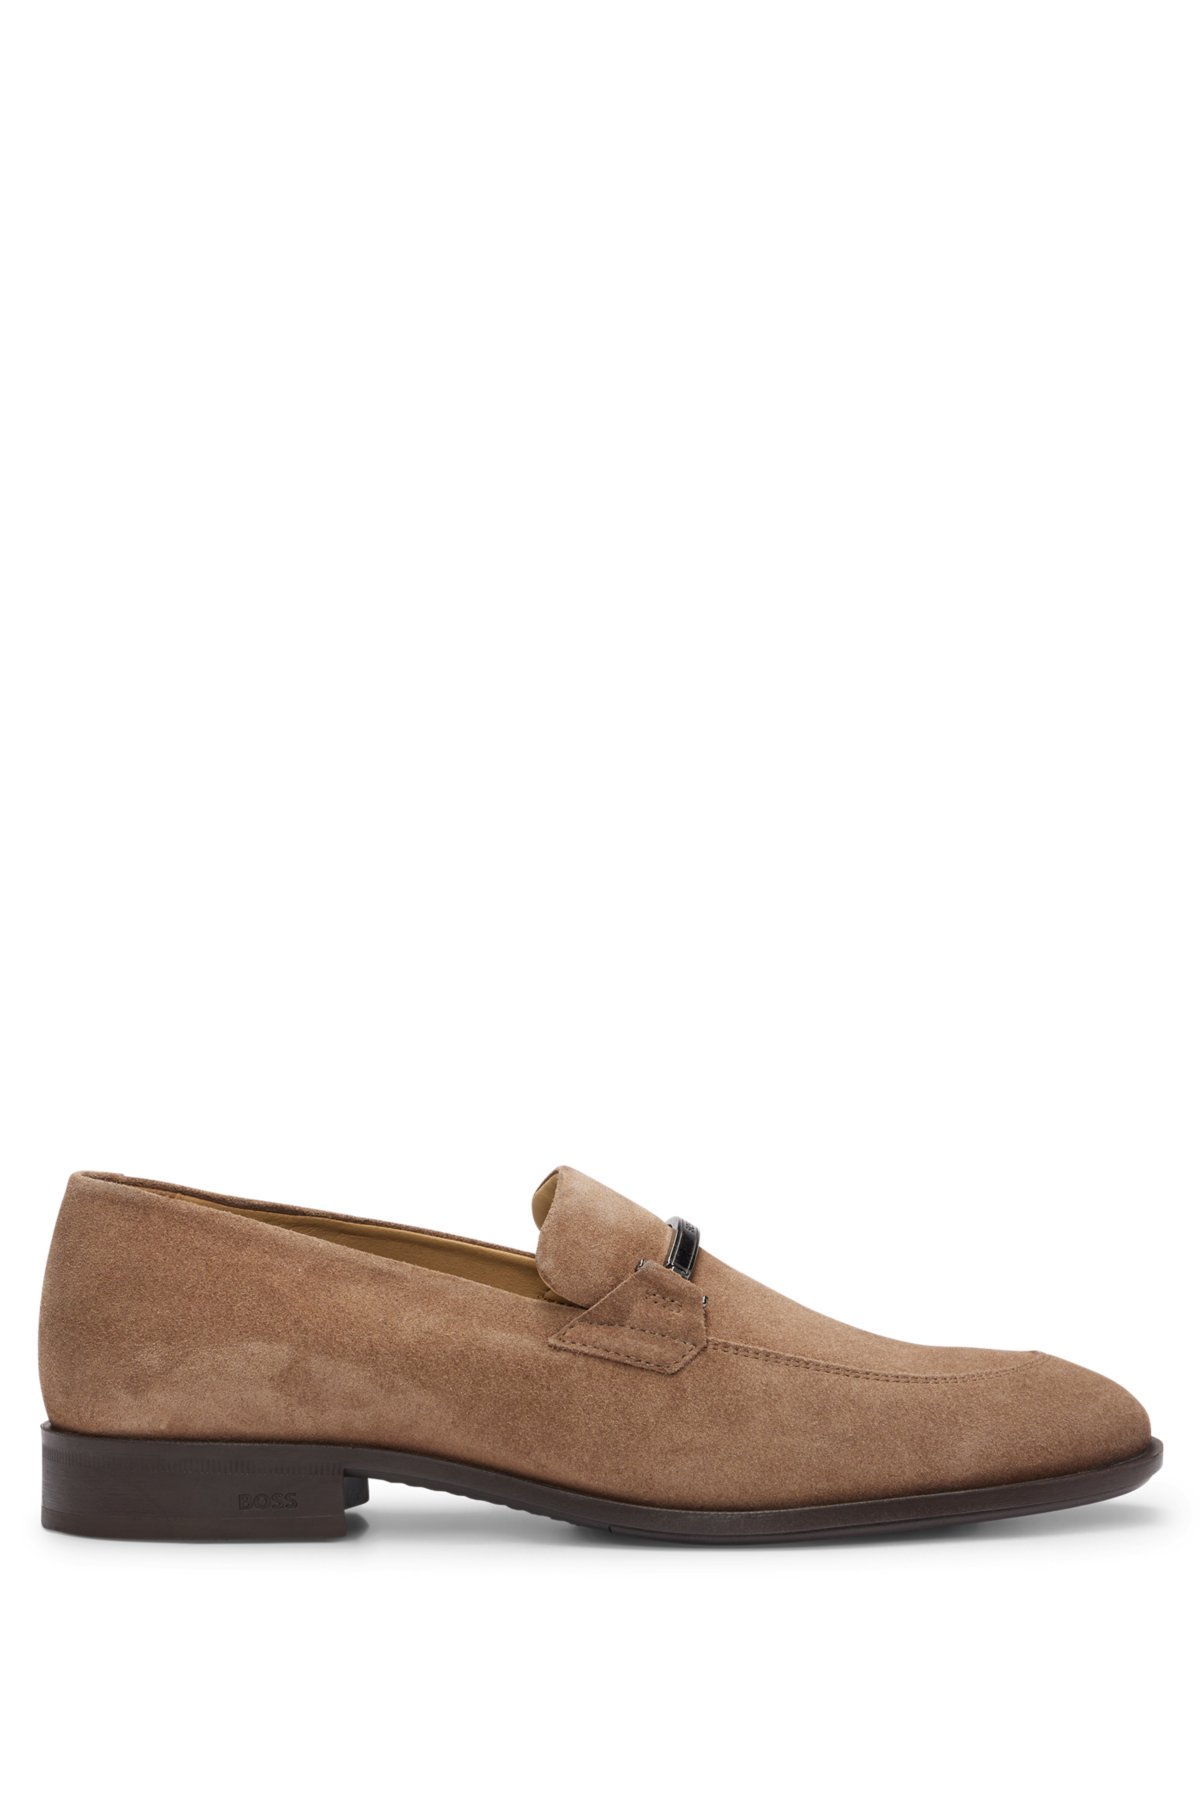 Suede loafers with branded hardware trim, Beige